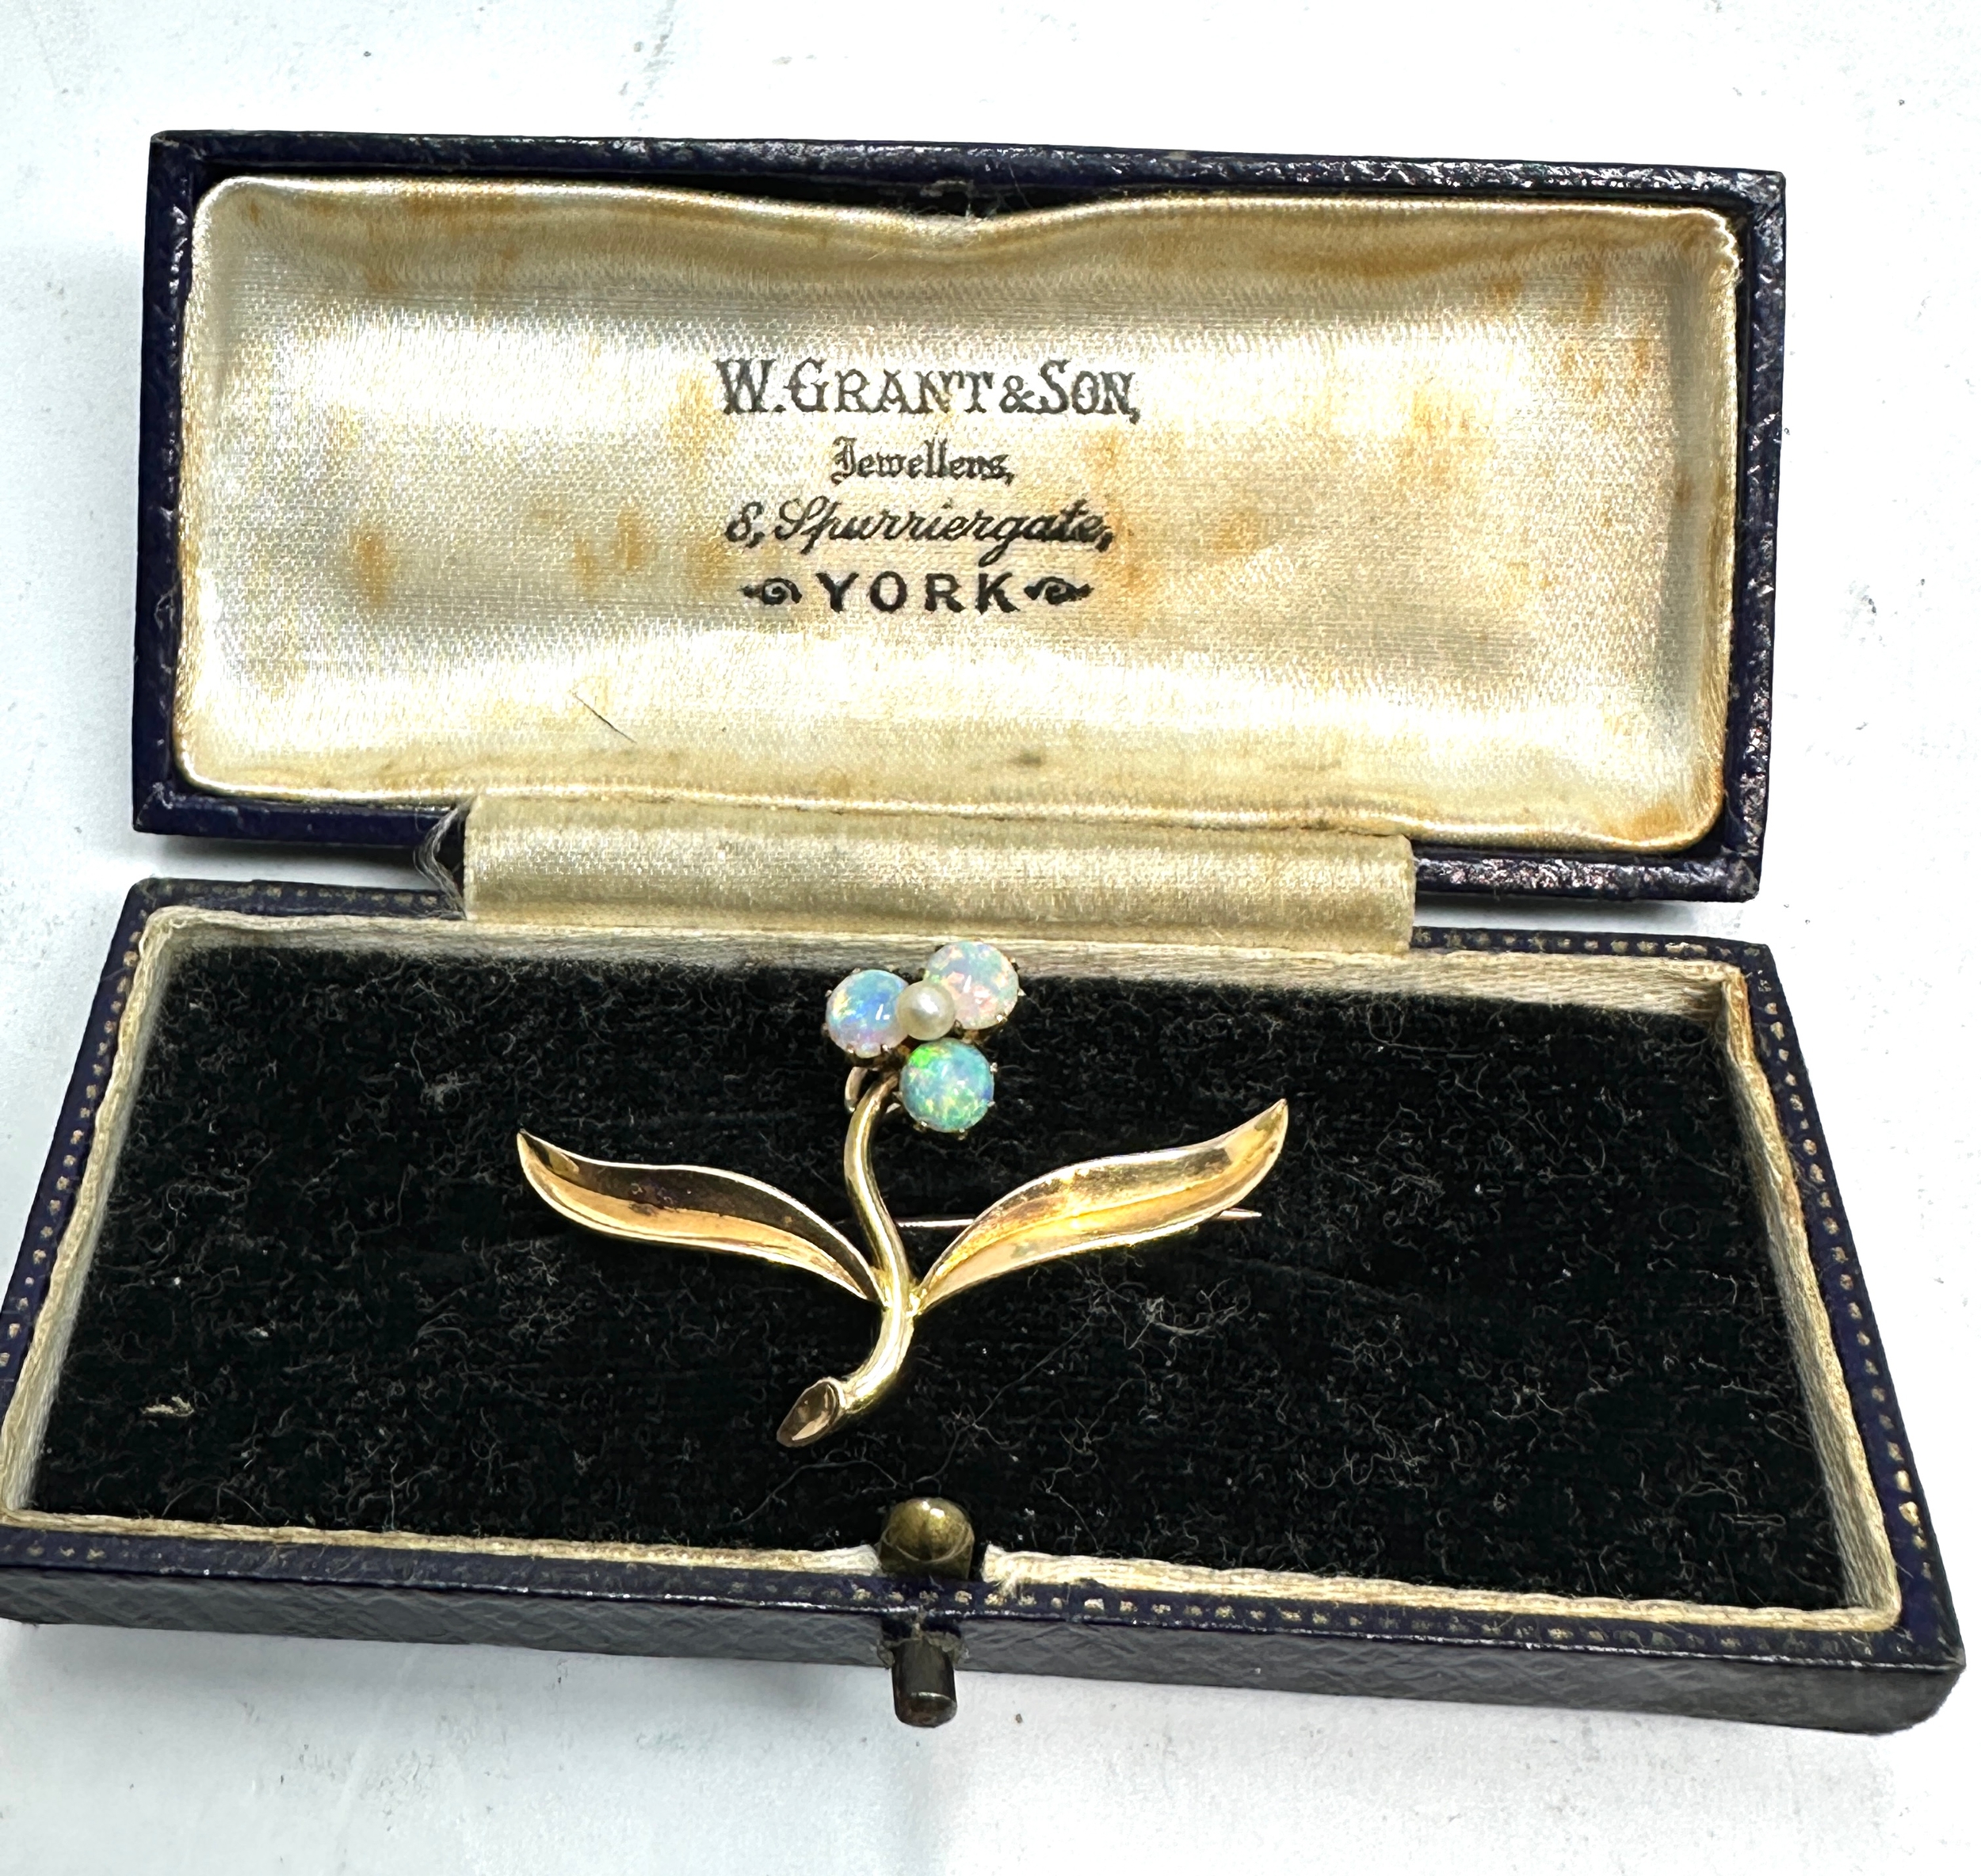 Boxed antique 15ct gold opal pendant / brooch measures approx 3.6cm wide 2.4cm drop weight 3.1g come